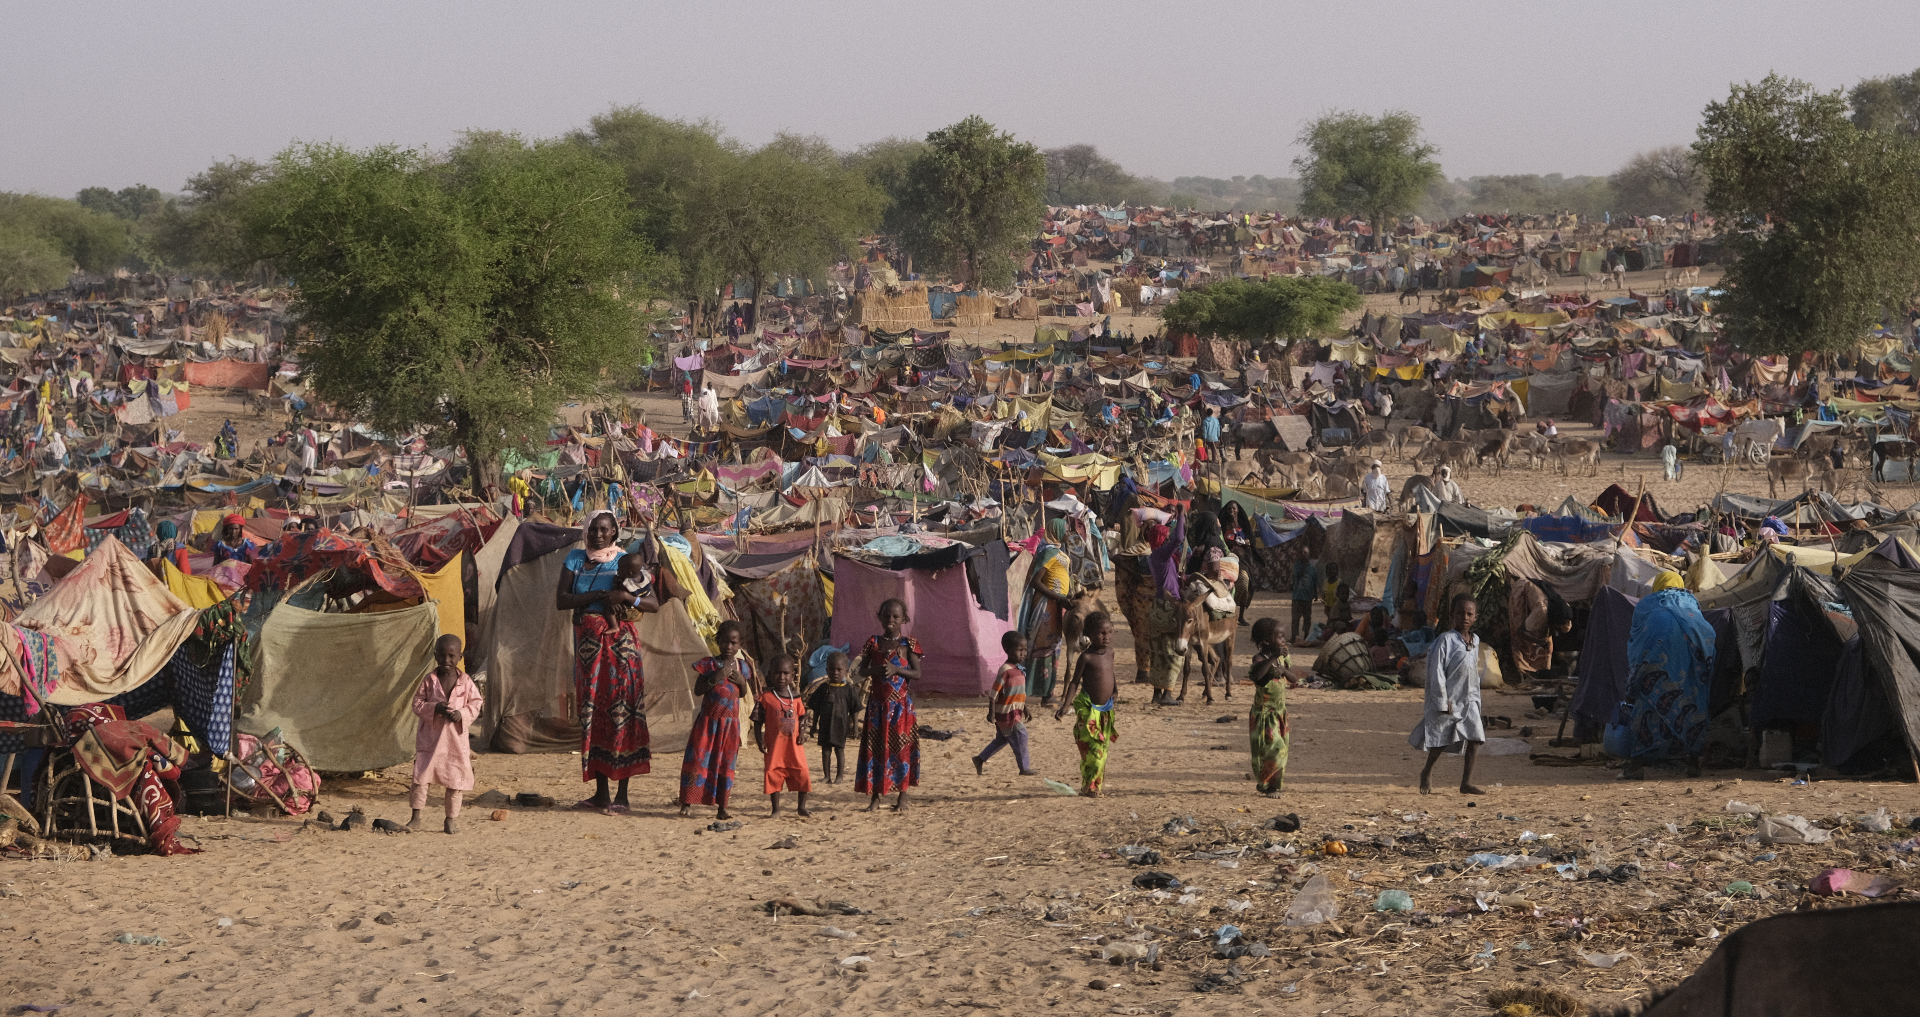 A landscape photo of Borota, Chad, where over 25,000 Sudanese refugees have found refuge since the war in Sudan broke out. Many fled quickly, without the opportunity to gather supplies.